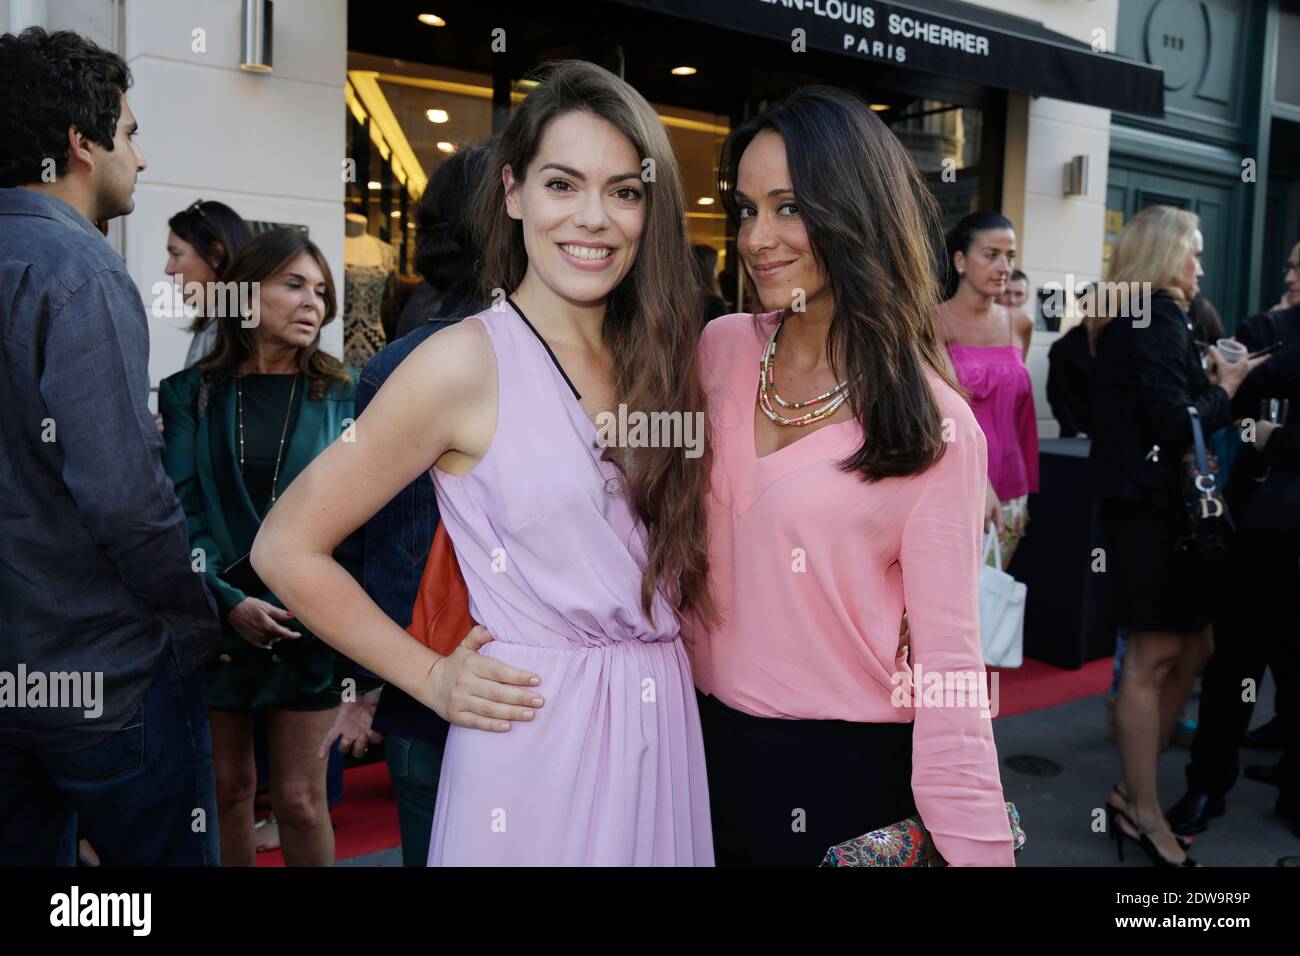 Chloe Dumas and Karine Lima attending the 'Jean-Louis Scherrer' Store Opening party in Paris, France on June 19, 2014. Photo by Jerome Domine/ABACAPRESS.COM Stock Photo